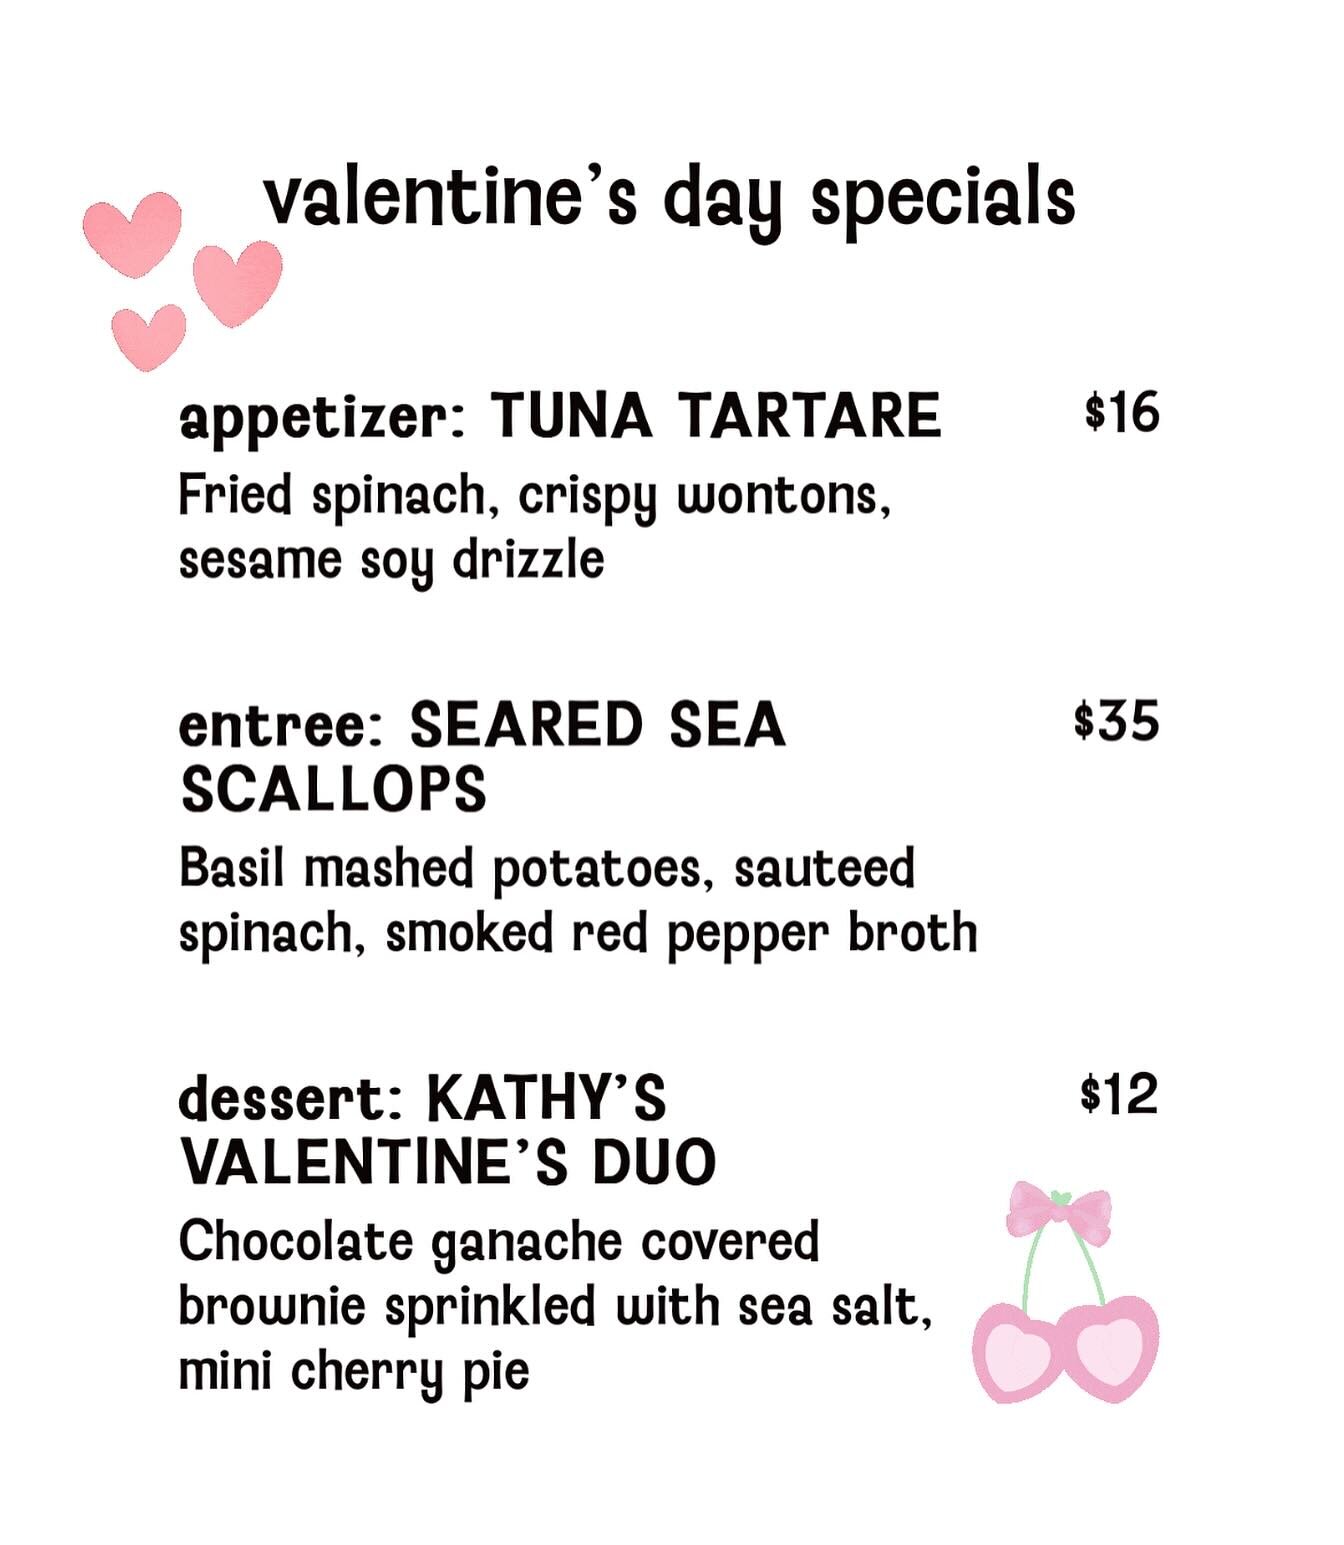 ✨ Few specials for tonight. ✨ Whether you&rsquo;re coming in because it&rsquo;s Wednesday &amp; you&rsquo;re hungry or you&rsquo;re coming in for a Valentine&rsquo;s Day date night, we&rsquo;re open 5-9! 💖 

Call ahead starting at 4:30 for our waitl